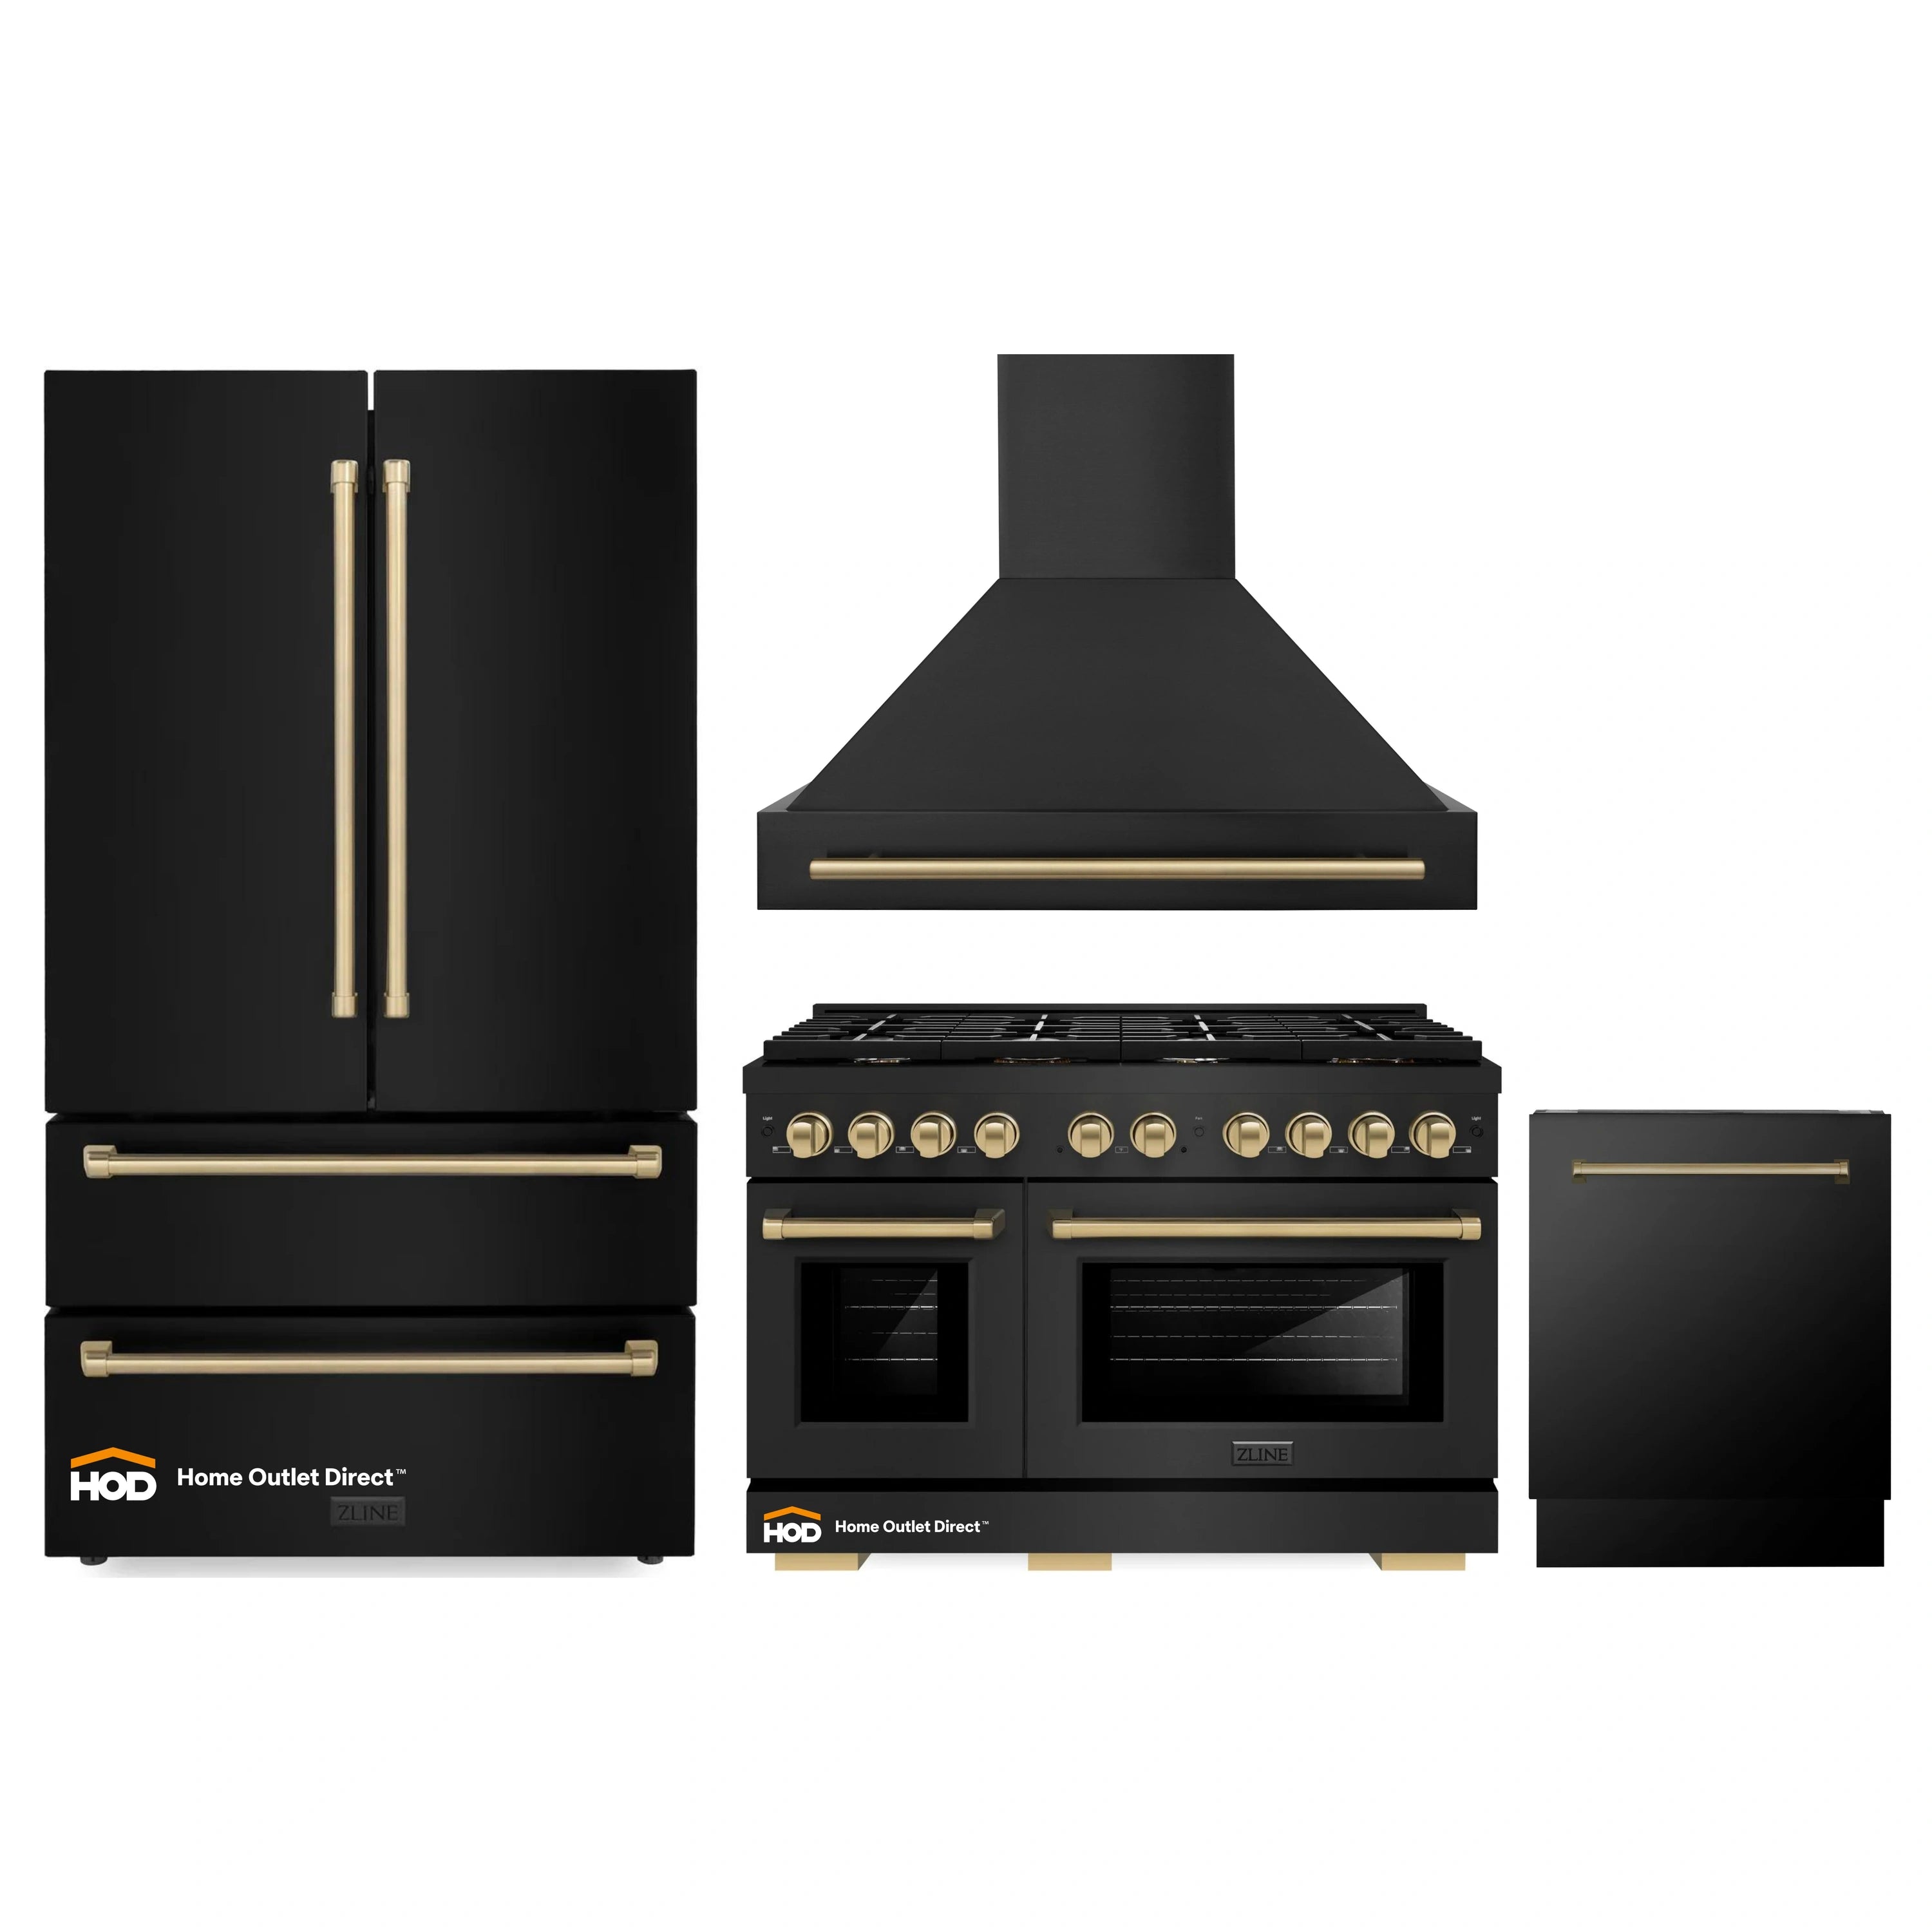 ZLINE Autograph Edition 4-Piece Appliance Package - 48-Inch Gas Range, Refrigerator, Wall Mounted Range Hood, & 24-Inch Tall Tub Dishwasher in Black Stainless Steel with Champagne Bronze Trim (4AKPR-RGBRHDWV48-CB)